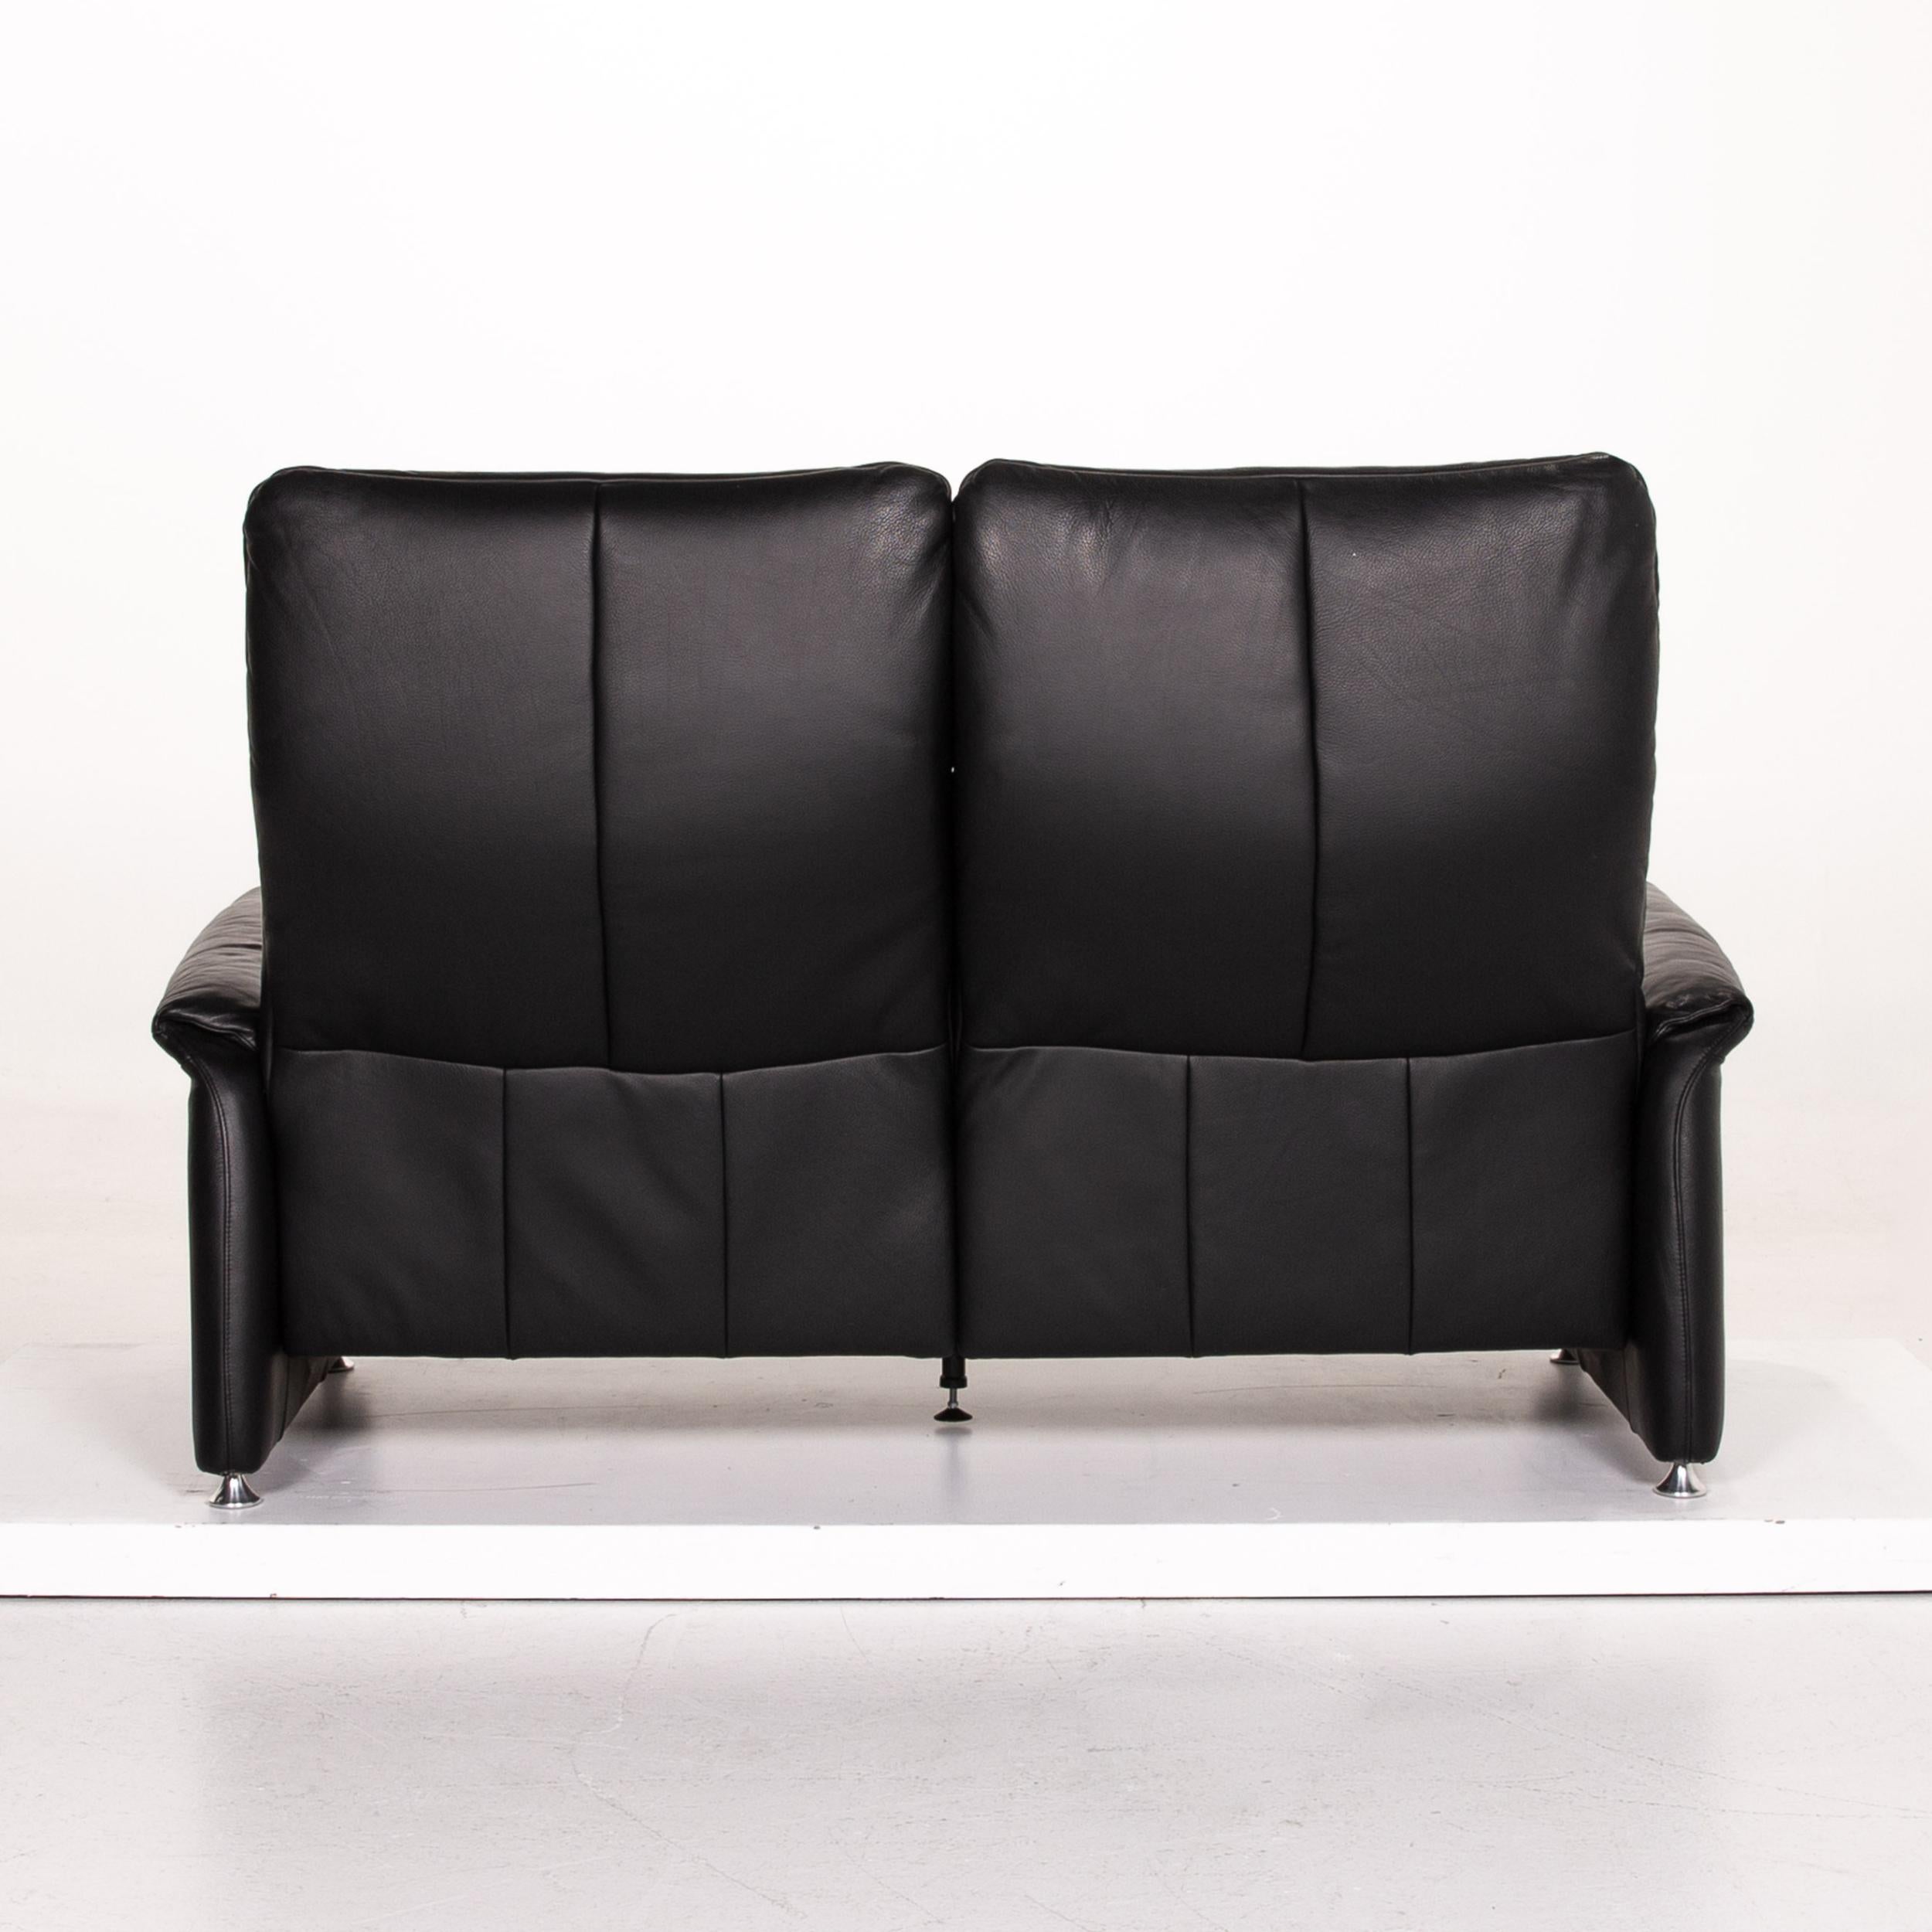 Willi Schillig Ergoline Leather Sofa Black Two-Seat Function Relax Function For Sale 5